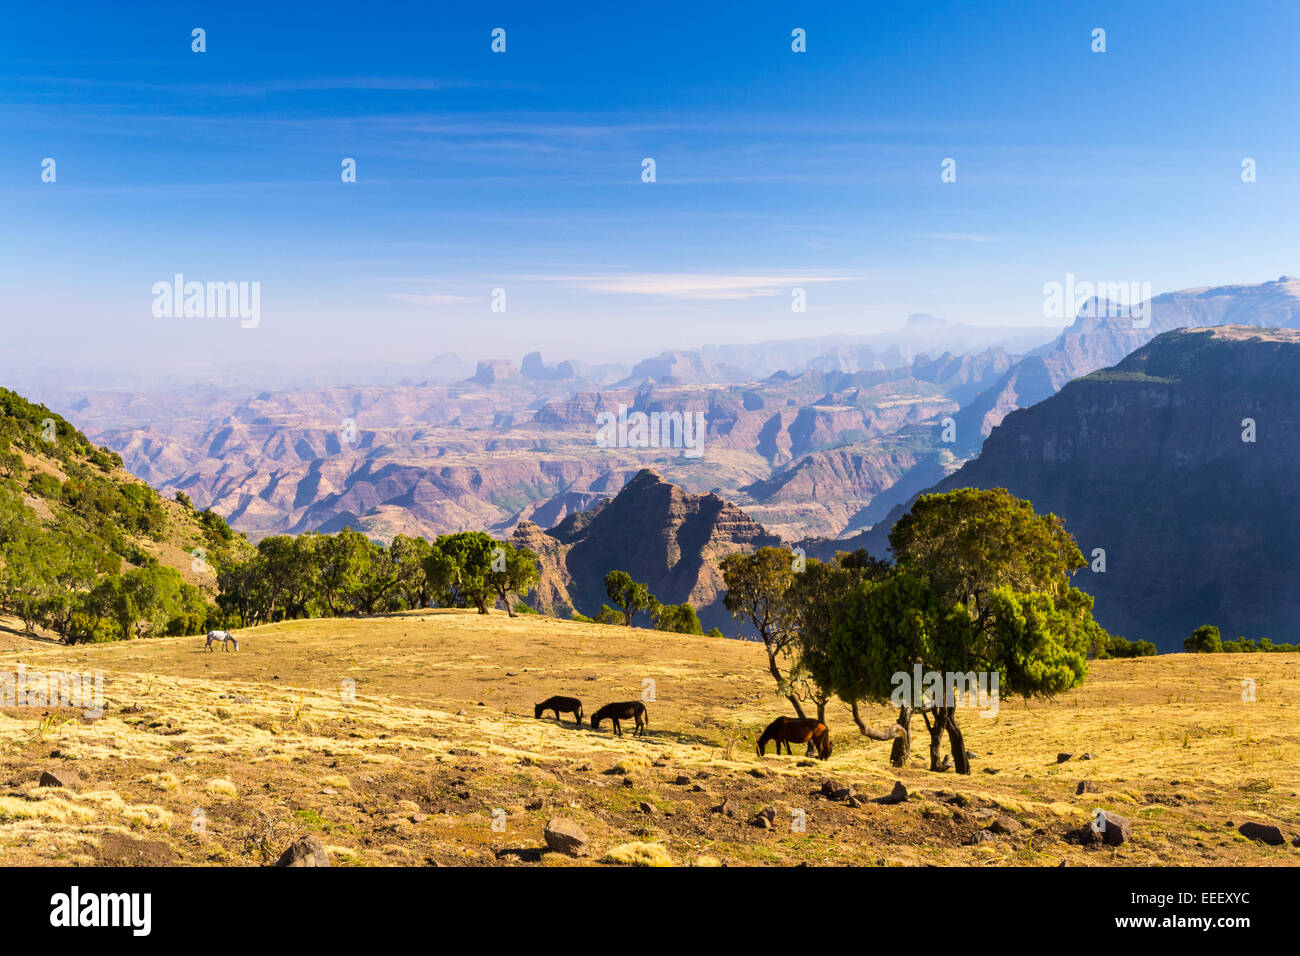 Panoramic view from the Simien Mountains National Park overlooking the Ethiopian plateau. Wild horse grazing. Stock Photo